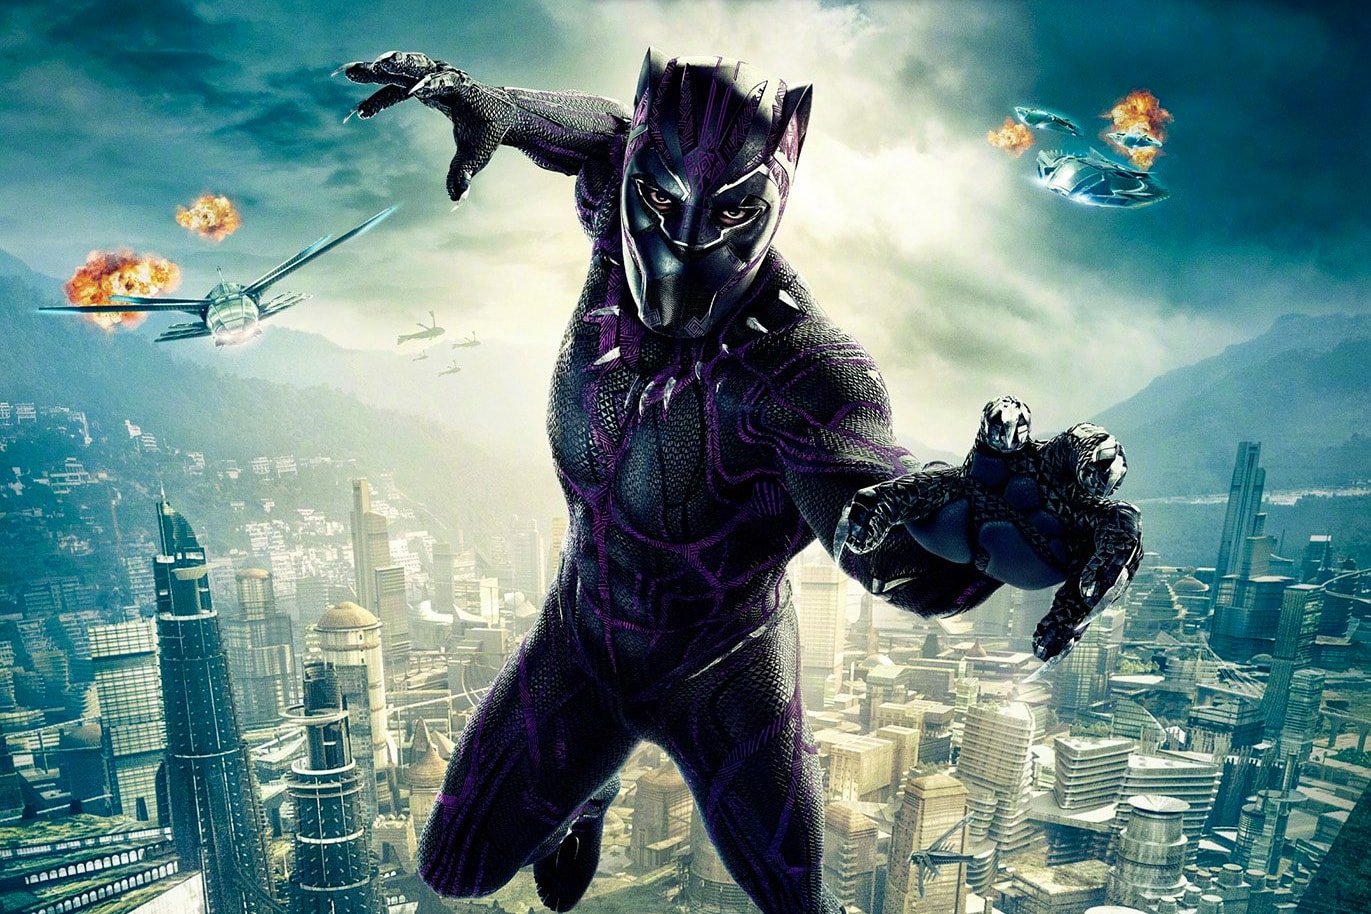 Black Panther Ticanic Gross Sales American Box Office record marvel disney